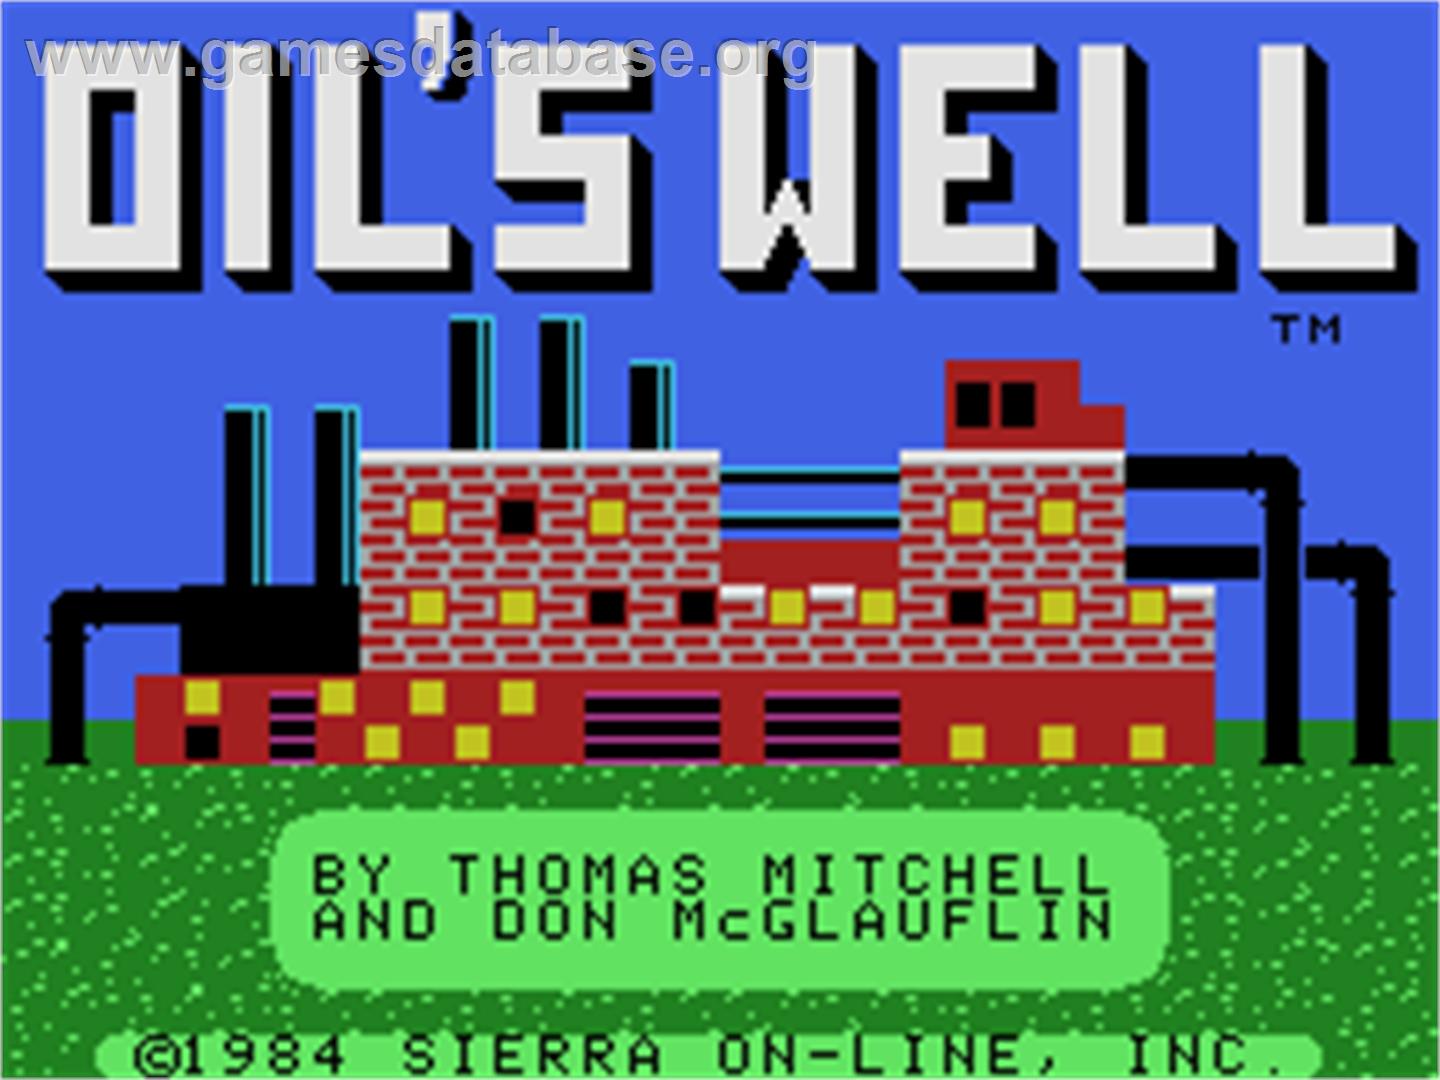 Oil's Well - Coleco Vision - Artwork - Title Screen